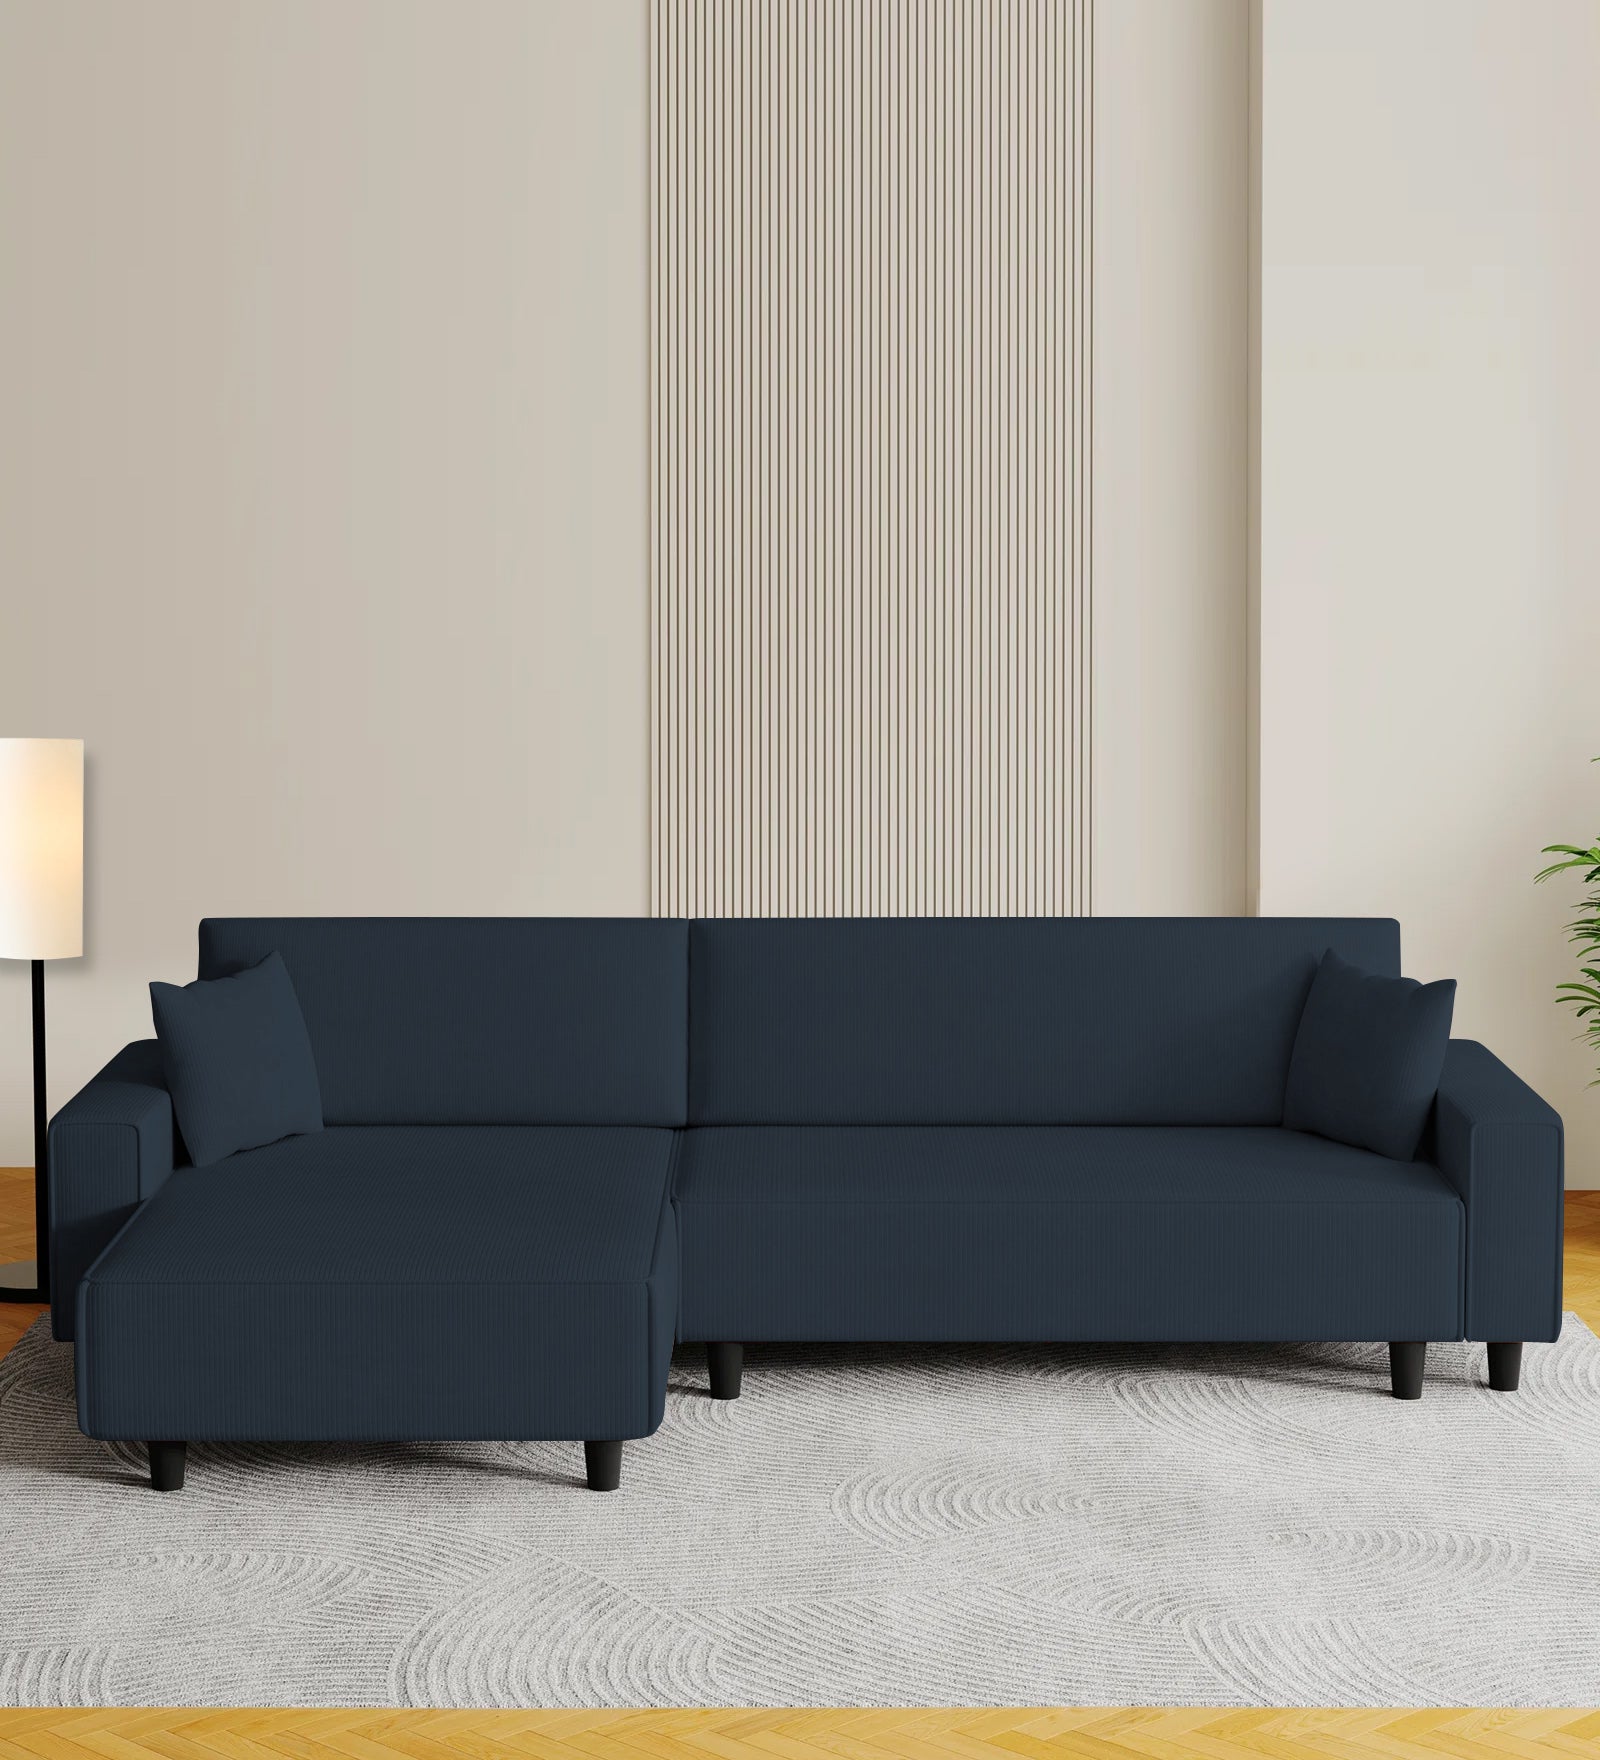 PPeach Fabric RHS 6 Seater Sectional Sofa Cum Bed With Storage In Denim Blue Colour